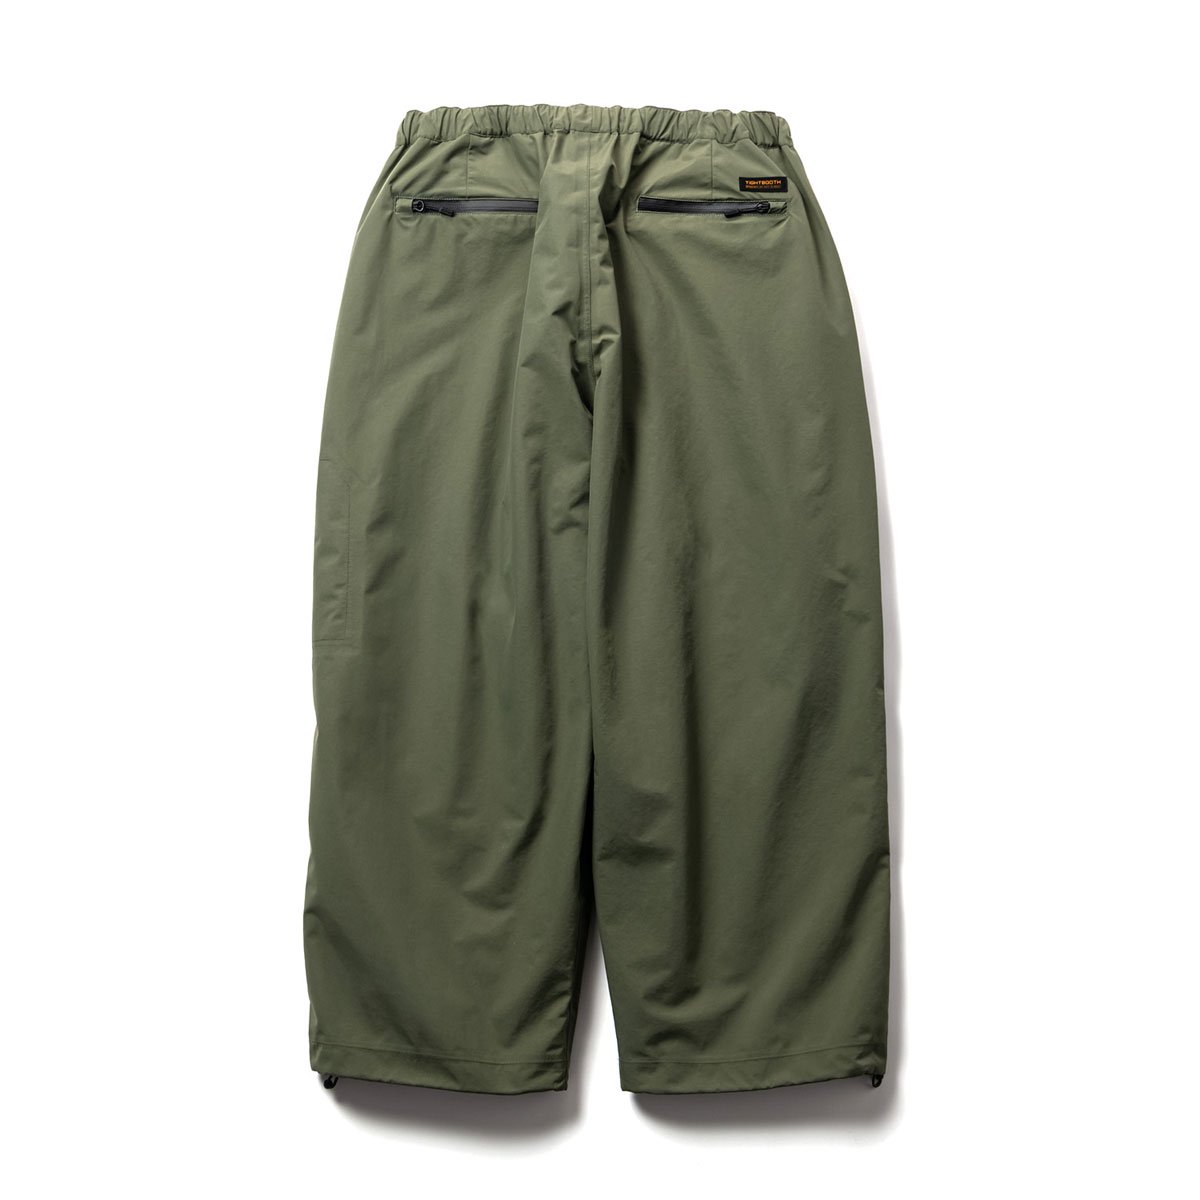 3 LAYER BAGGY PANTS - TIGHTBOOTH PRODUCTION